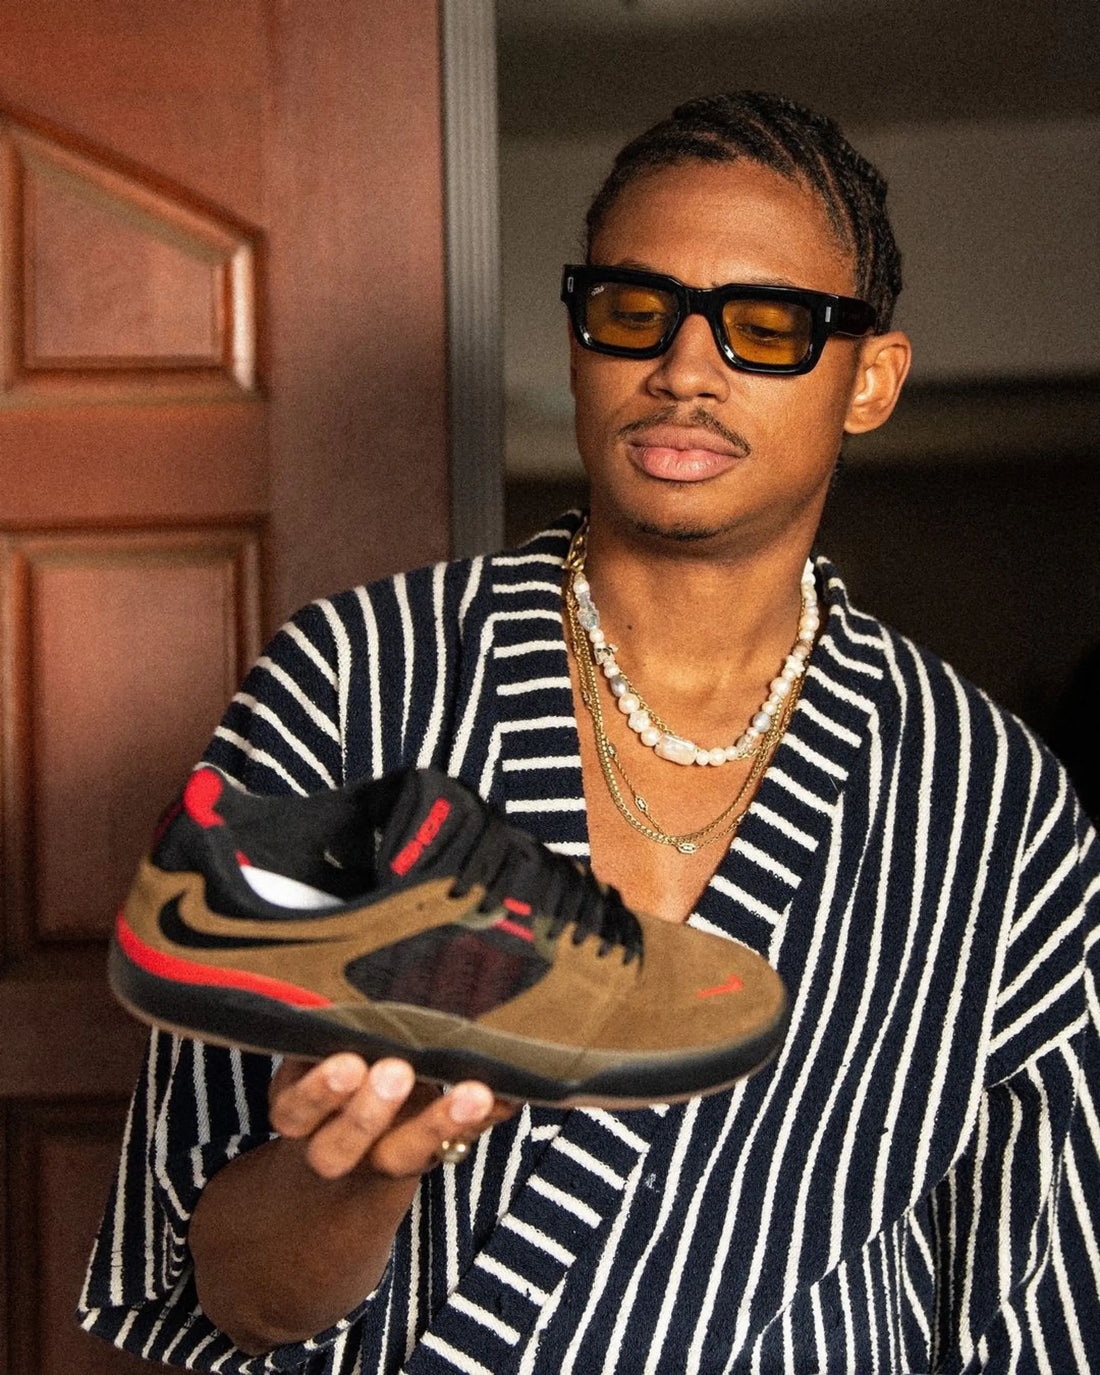 Ishod Wair with his new Nike SB pro shoe